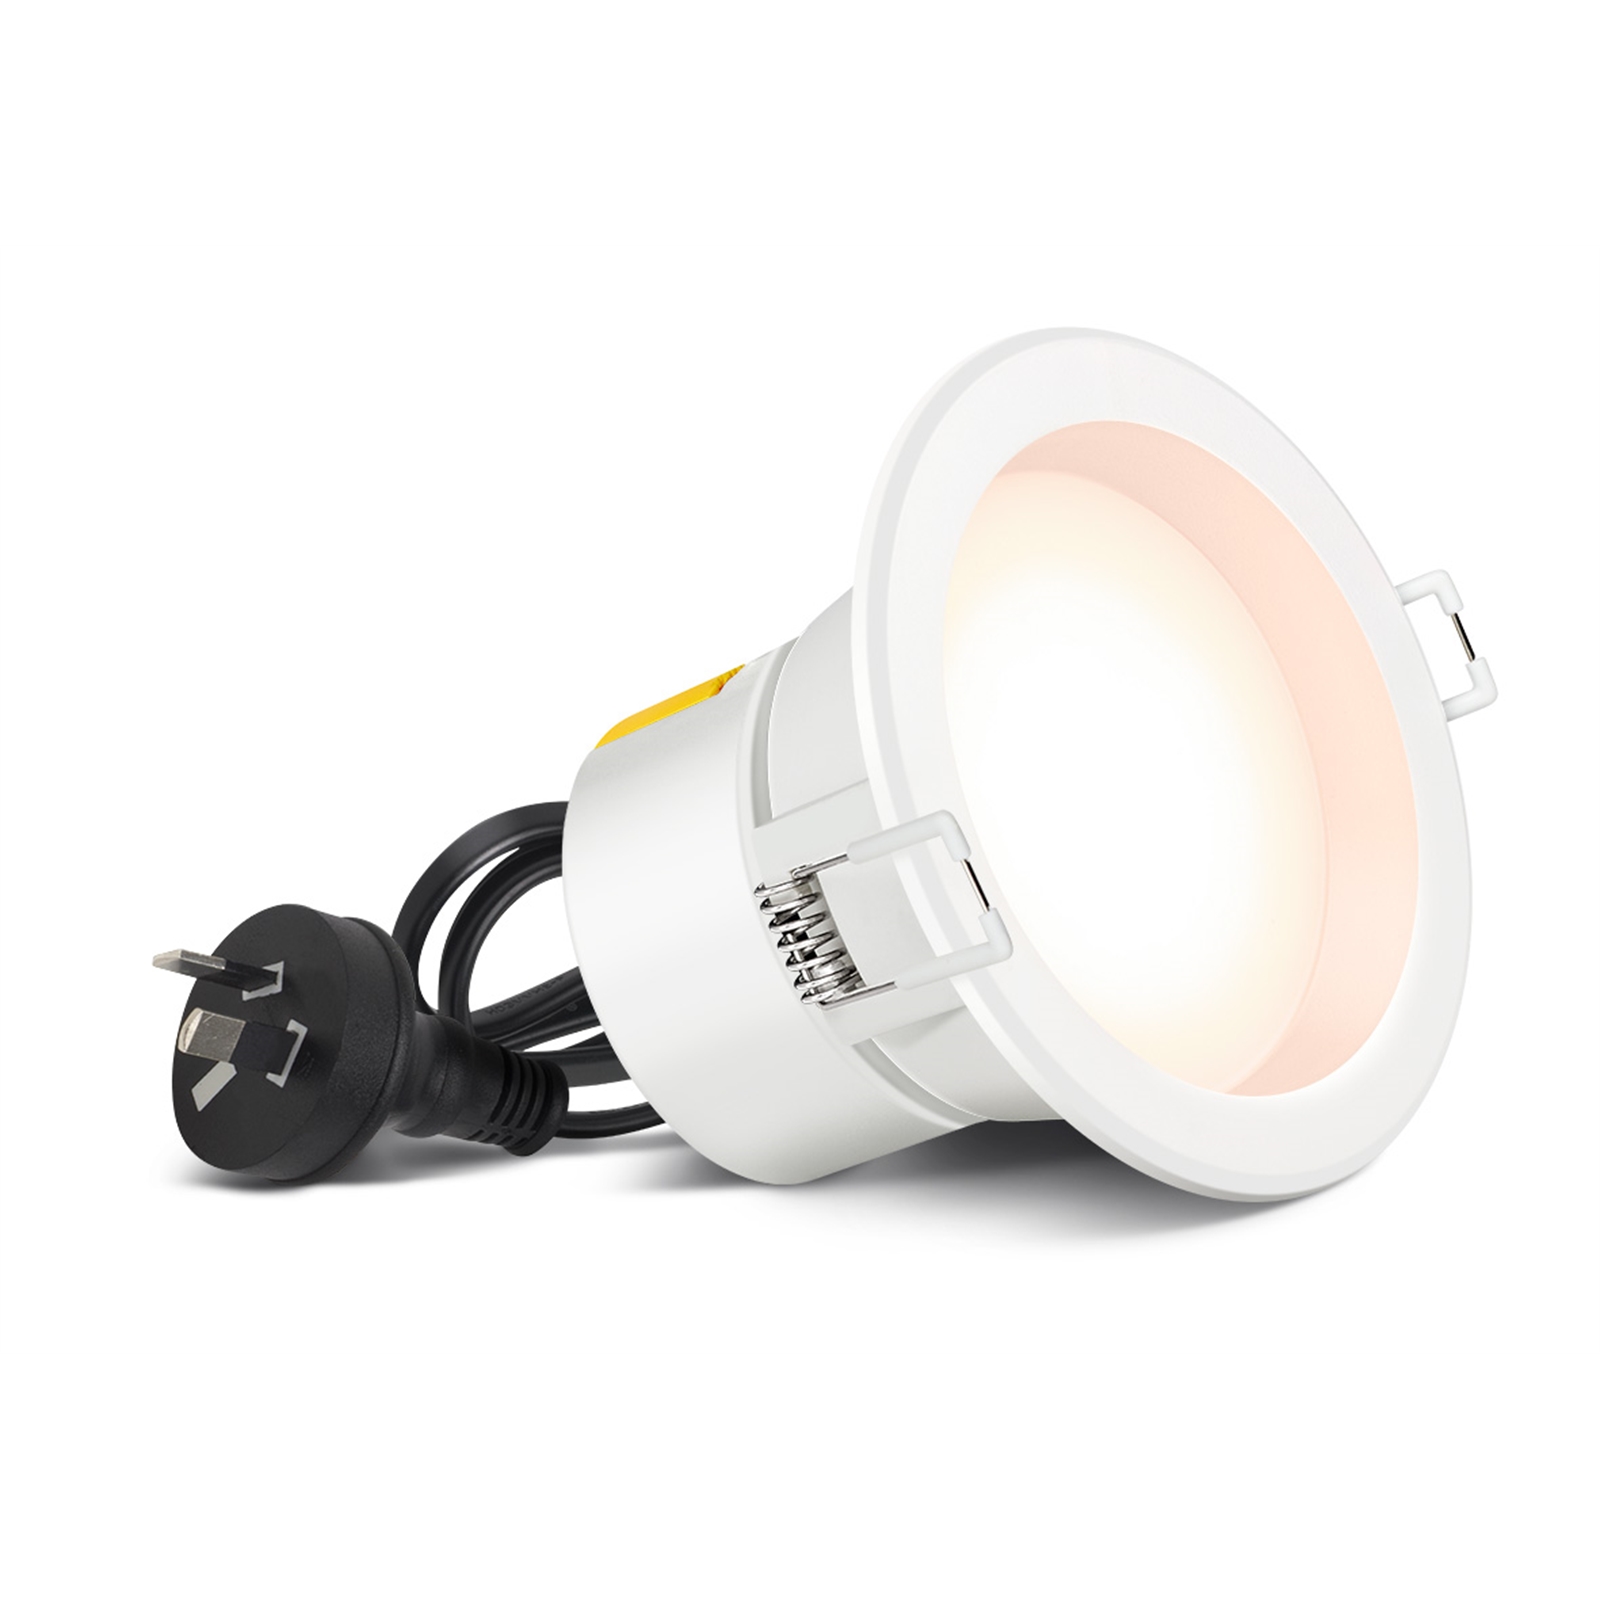 HPM 7W Warm White LED Dimmable Fixed Downlight